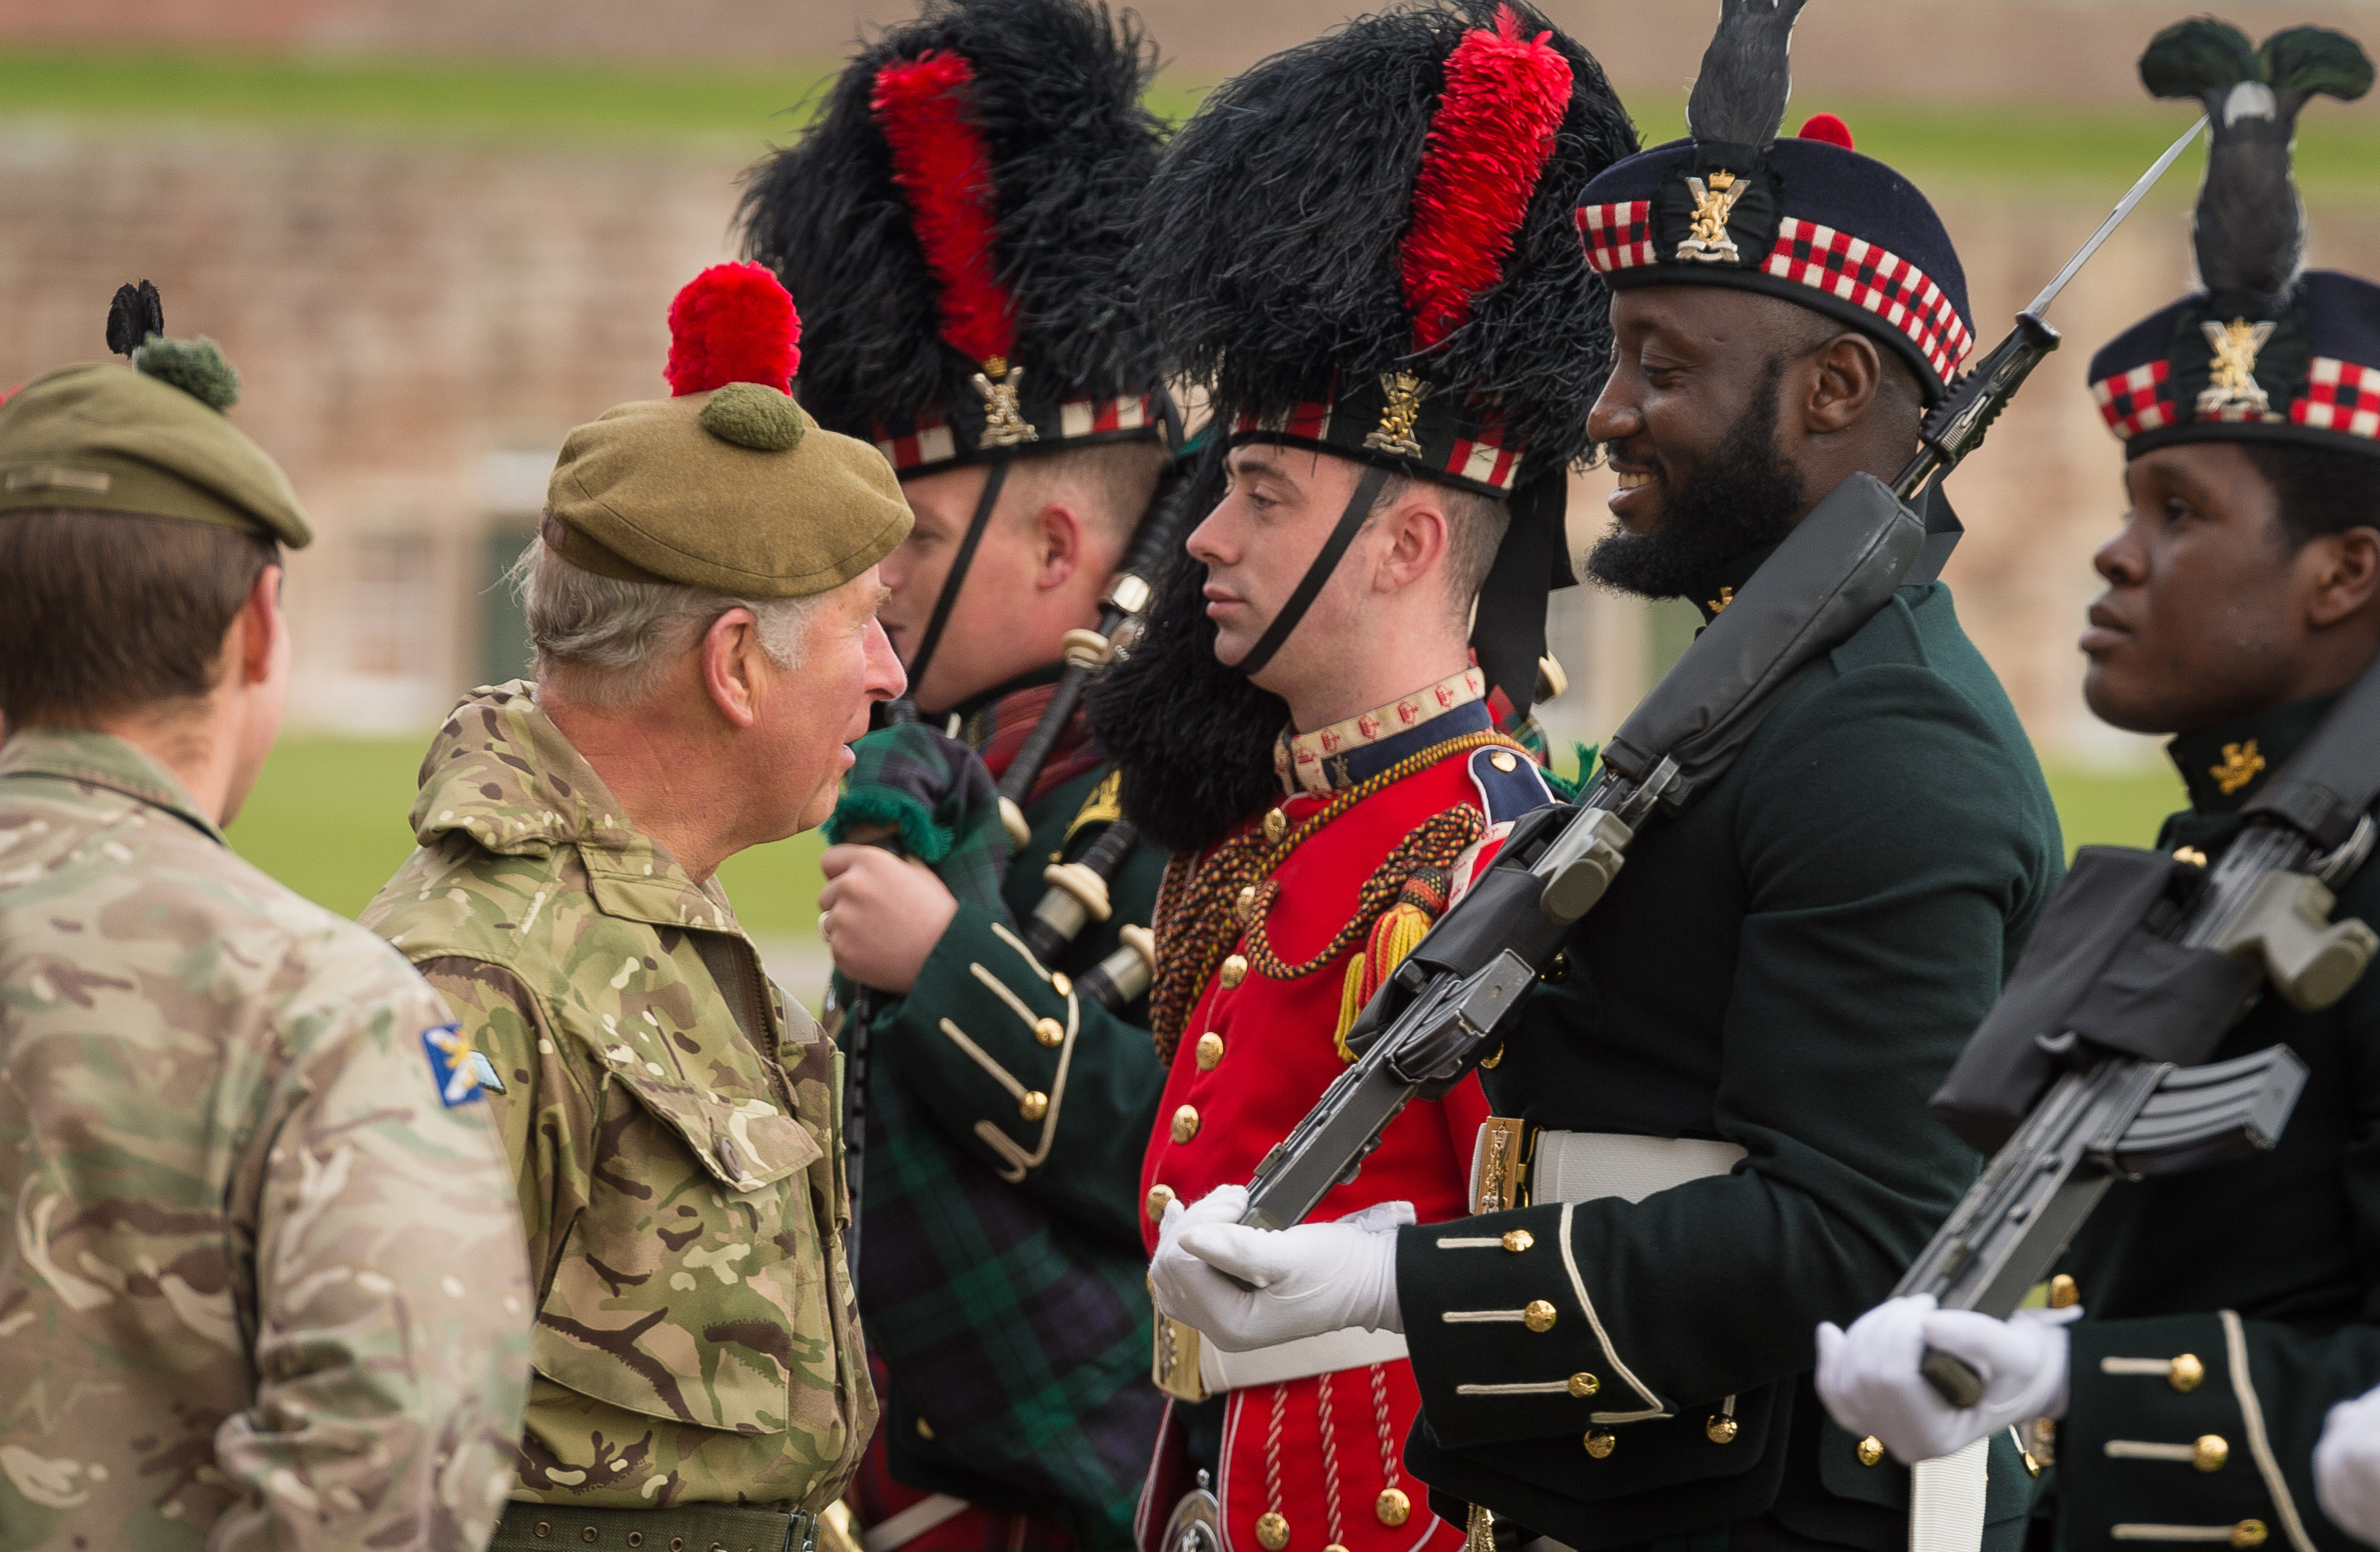 The King’s close bond with the Army in Scotland | The British Army